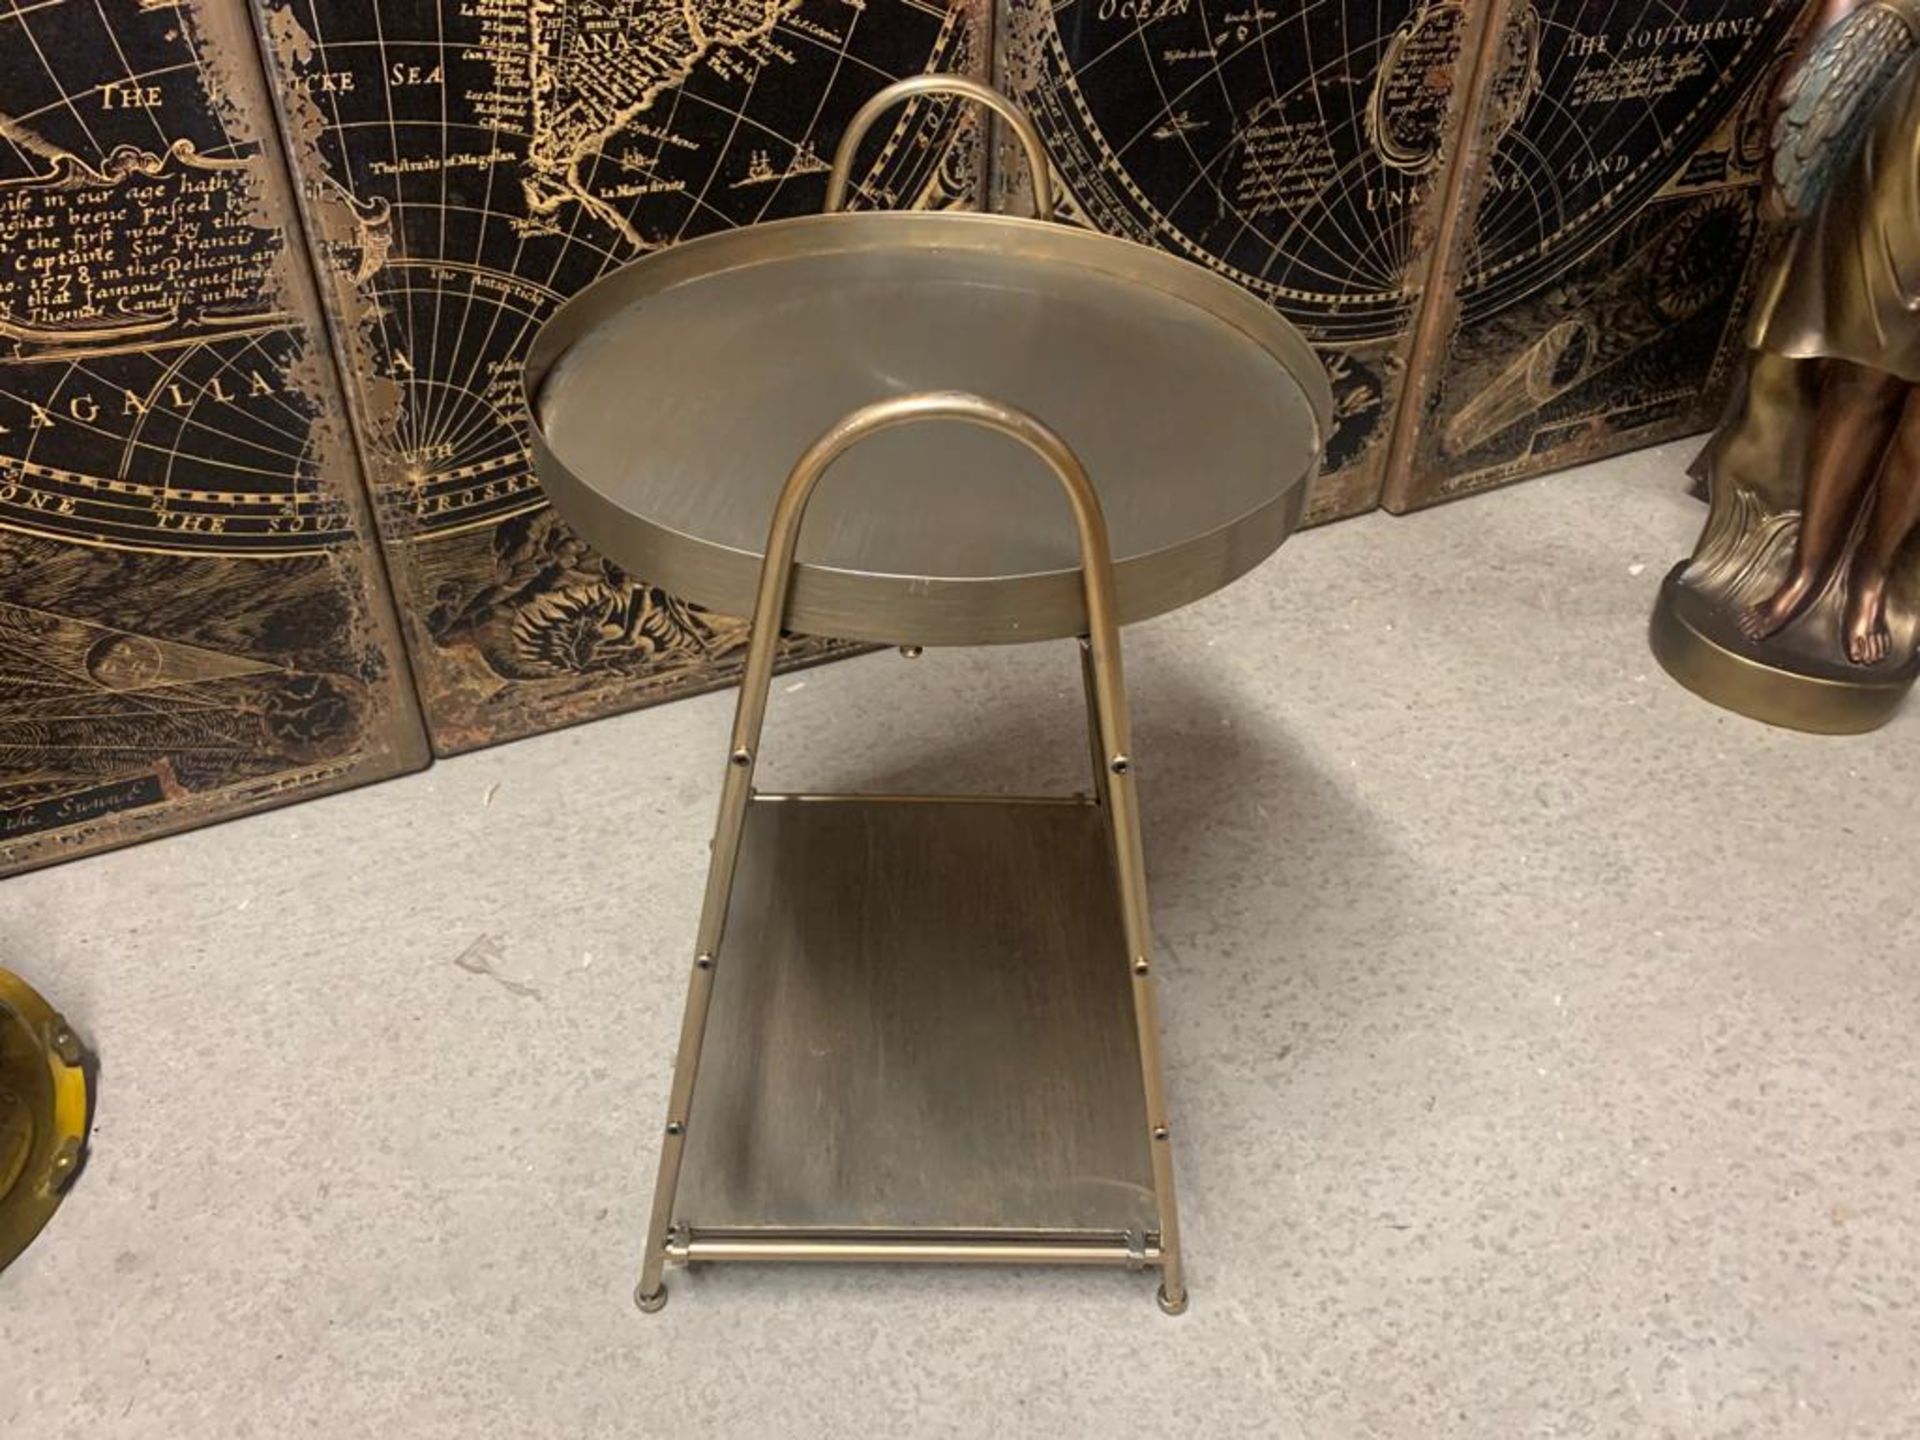 New Boxed Large Drinks Tray And Side Table In A Brass Finish (Approx 70cm) - Image 3 of 3